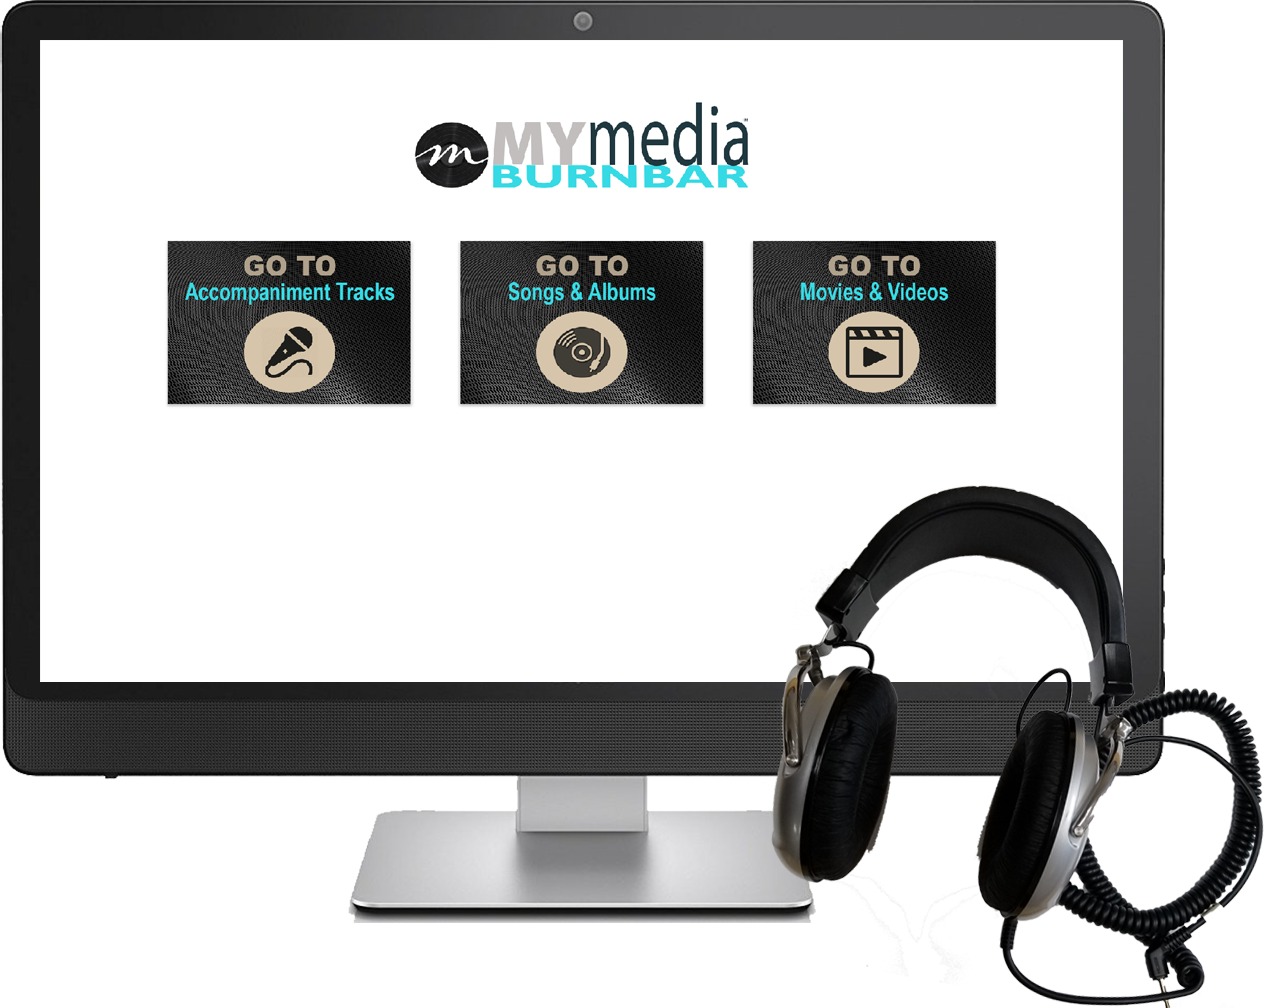 How To Download Movies On Mymedia